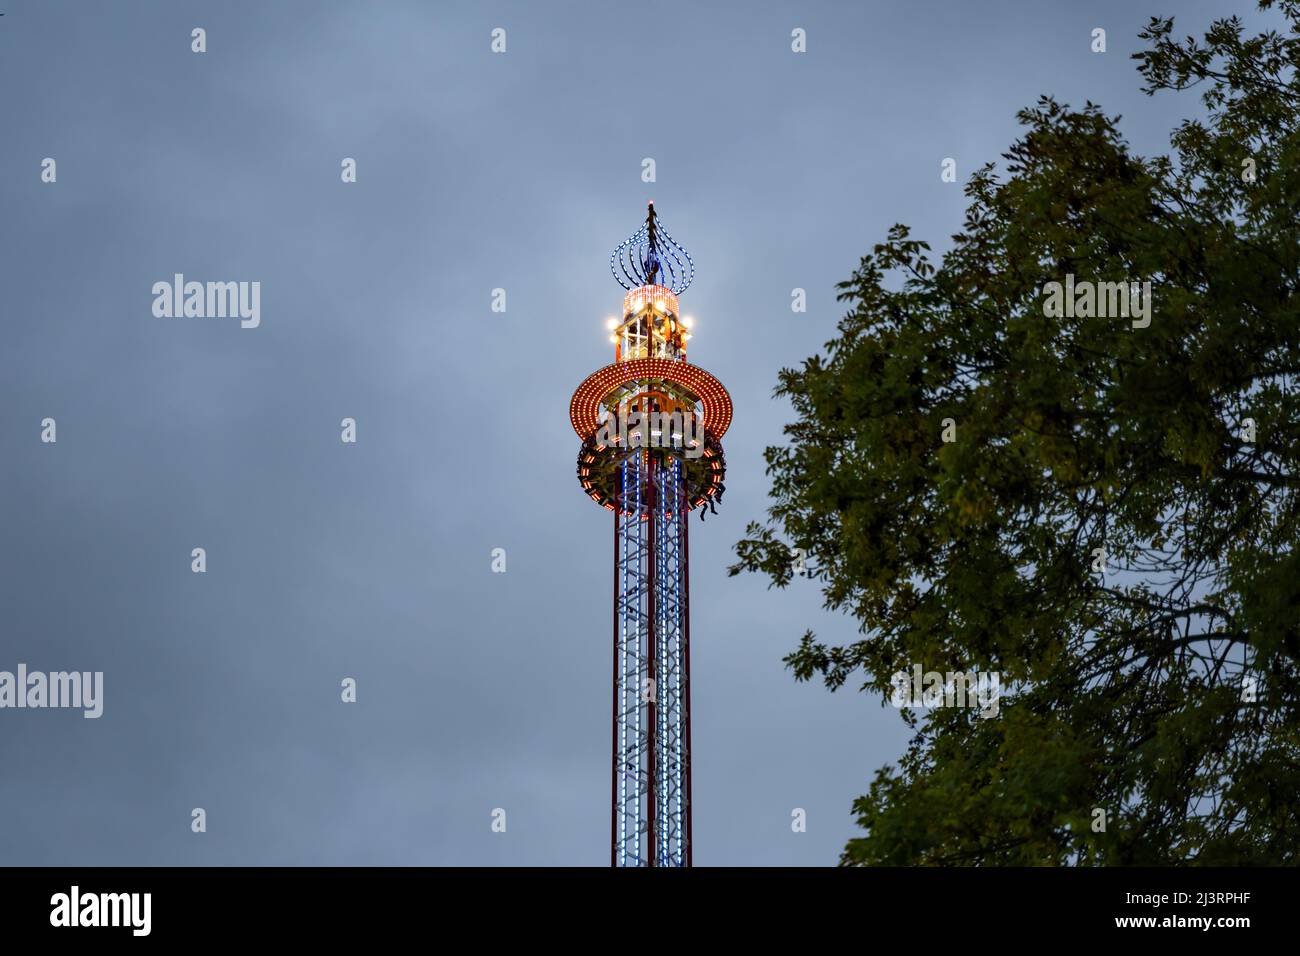 Fairground ride very high in the air in front of a dark sky. The illuminated free fall tower is waiting at the upper position and making people afraid Stock Photo